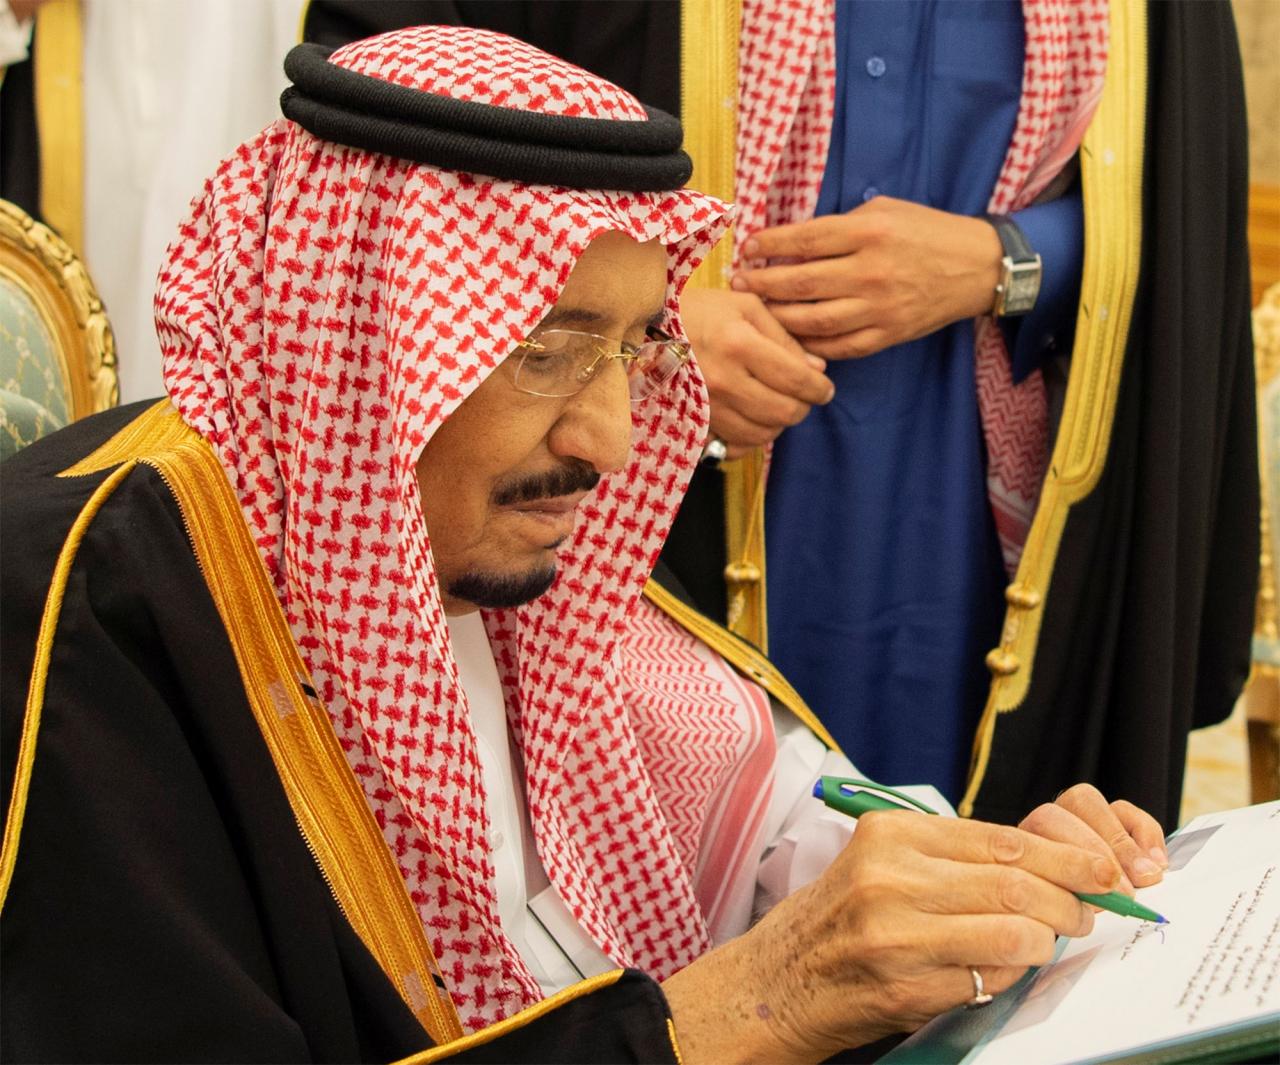 Saudi king appoints new foreign minister in major cabinet reshuffle